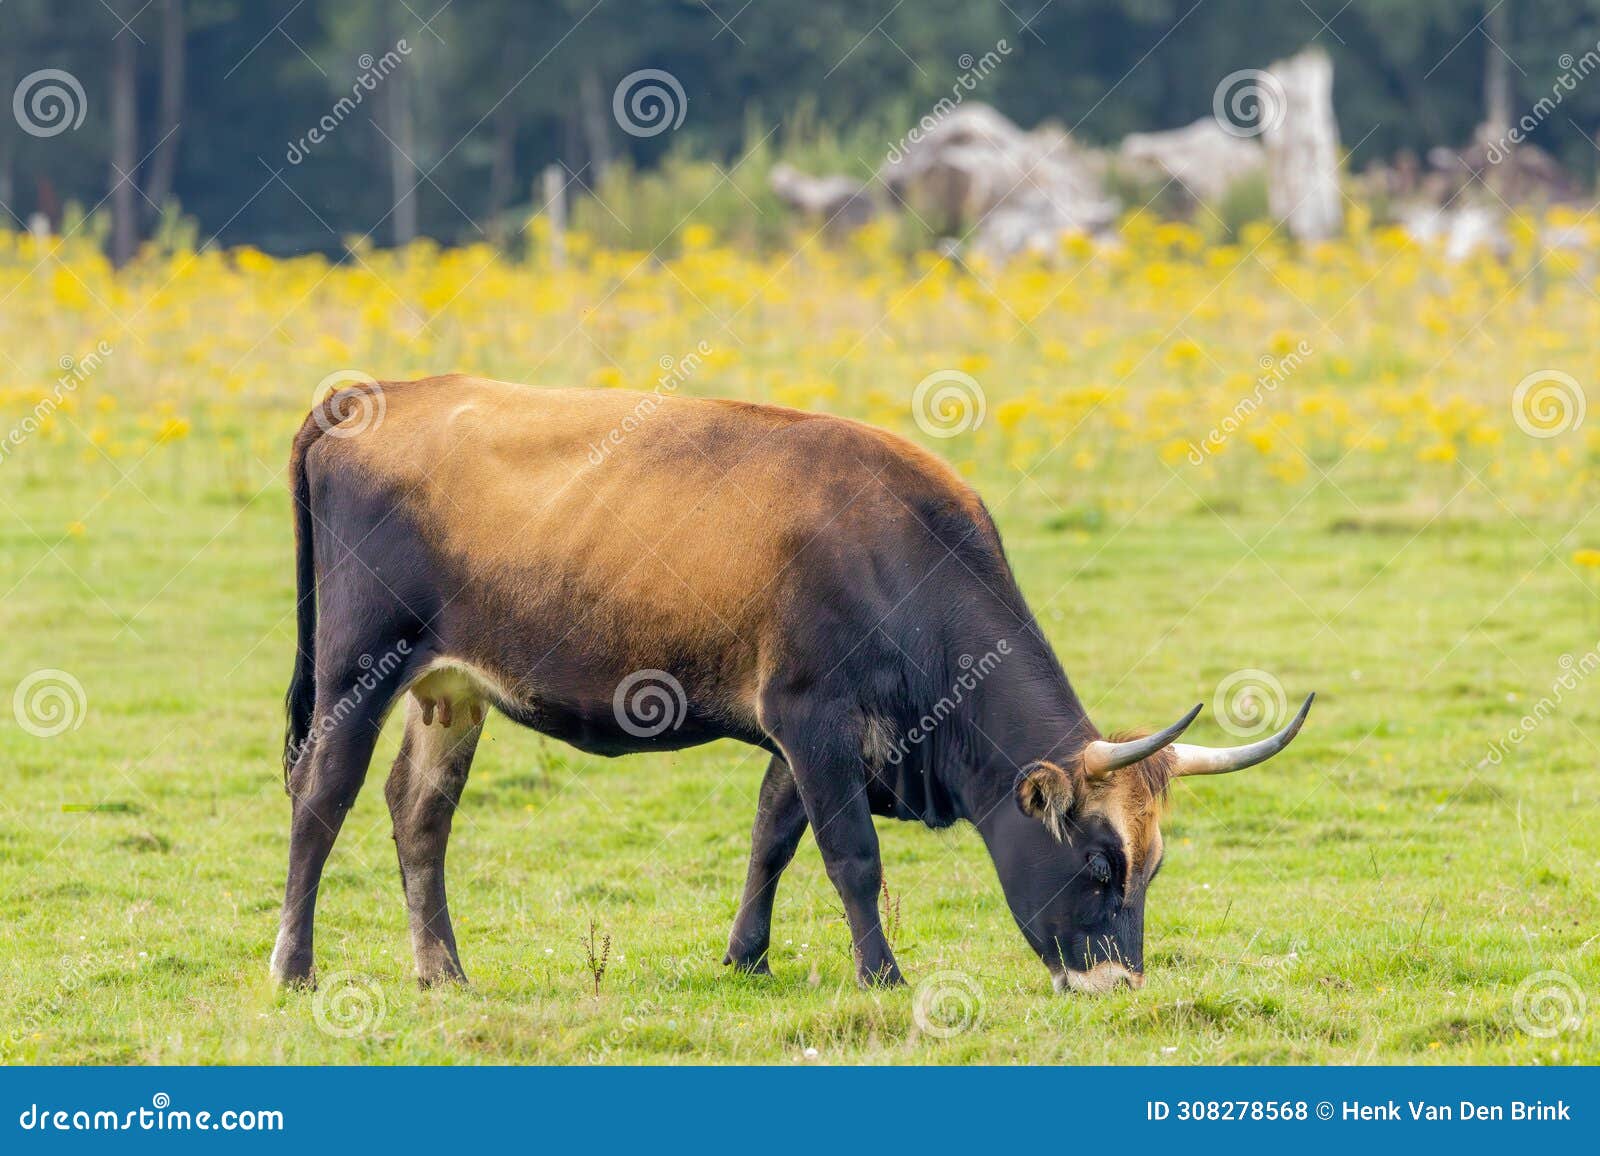 natural landscape with sayaguesa touros cow used as a large grazer for nature conservation